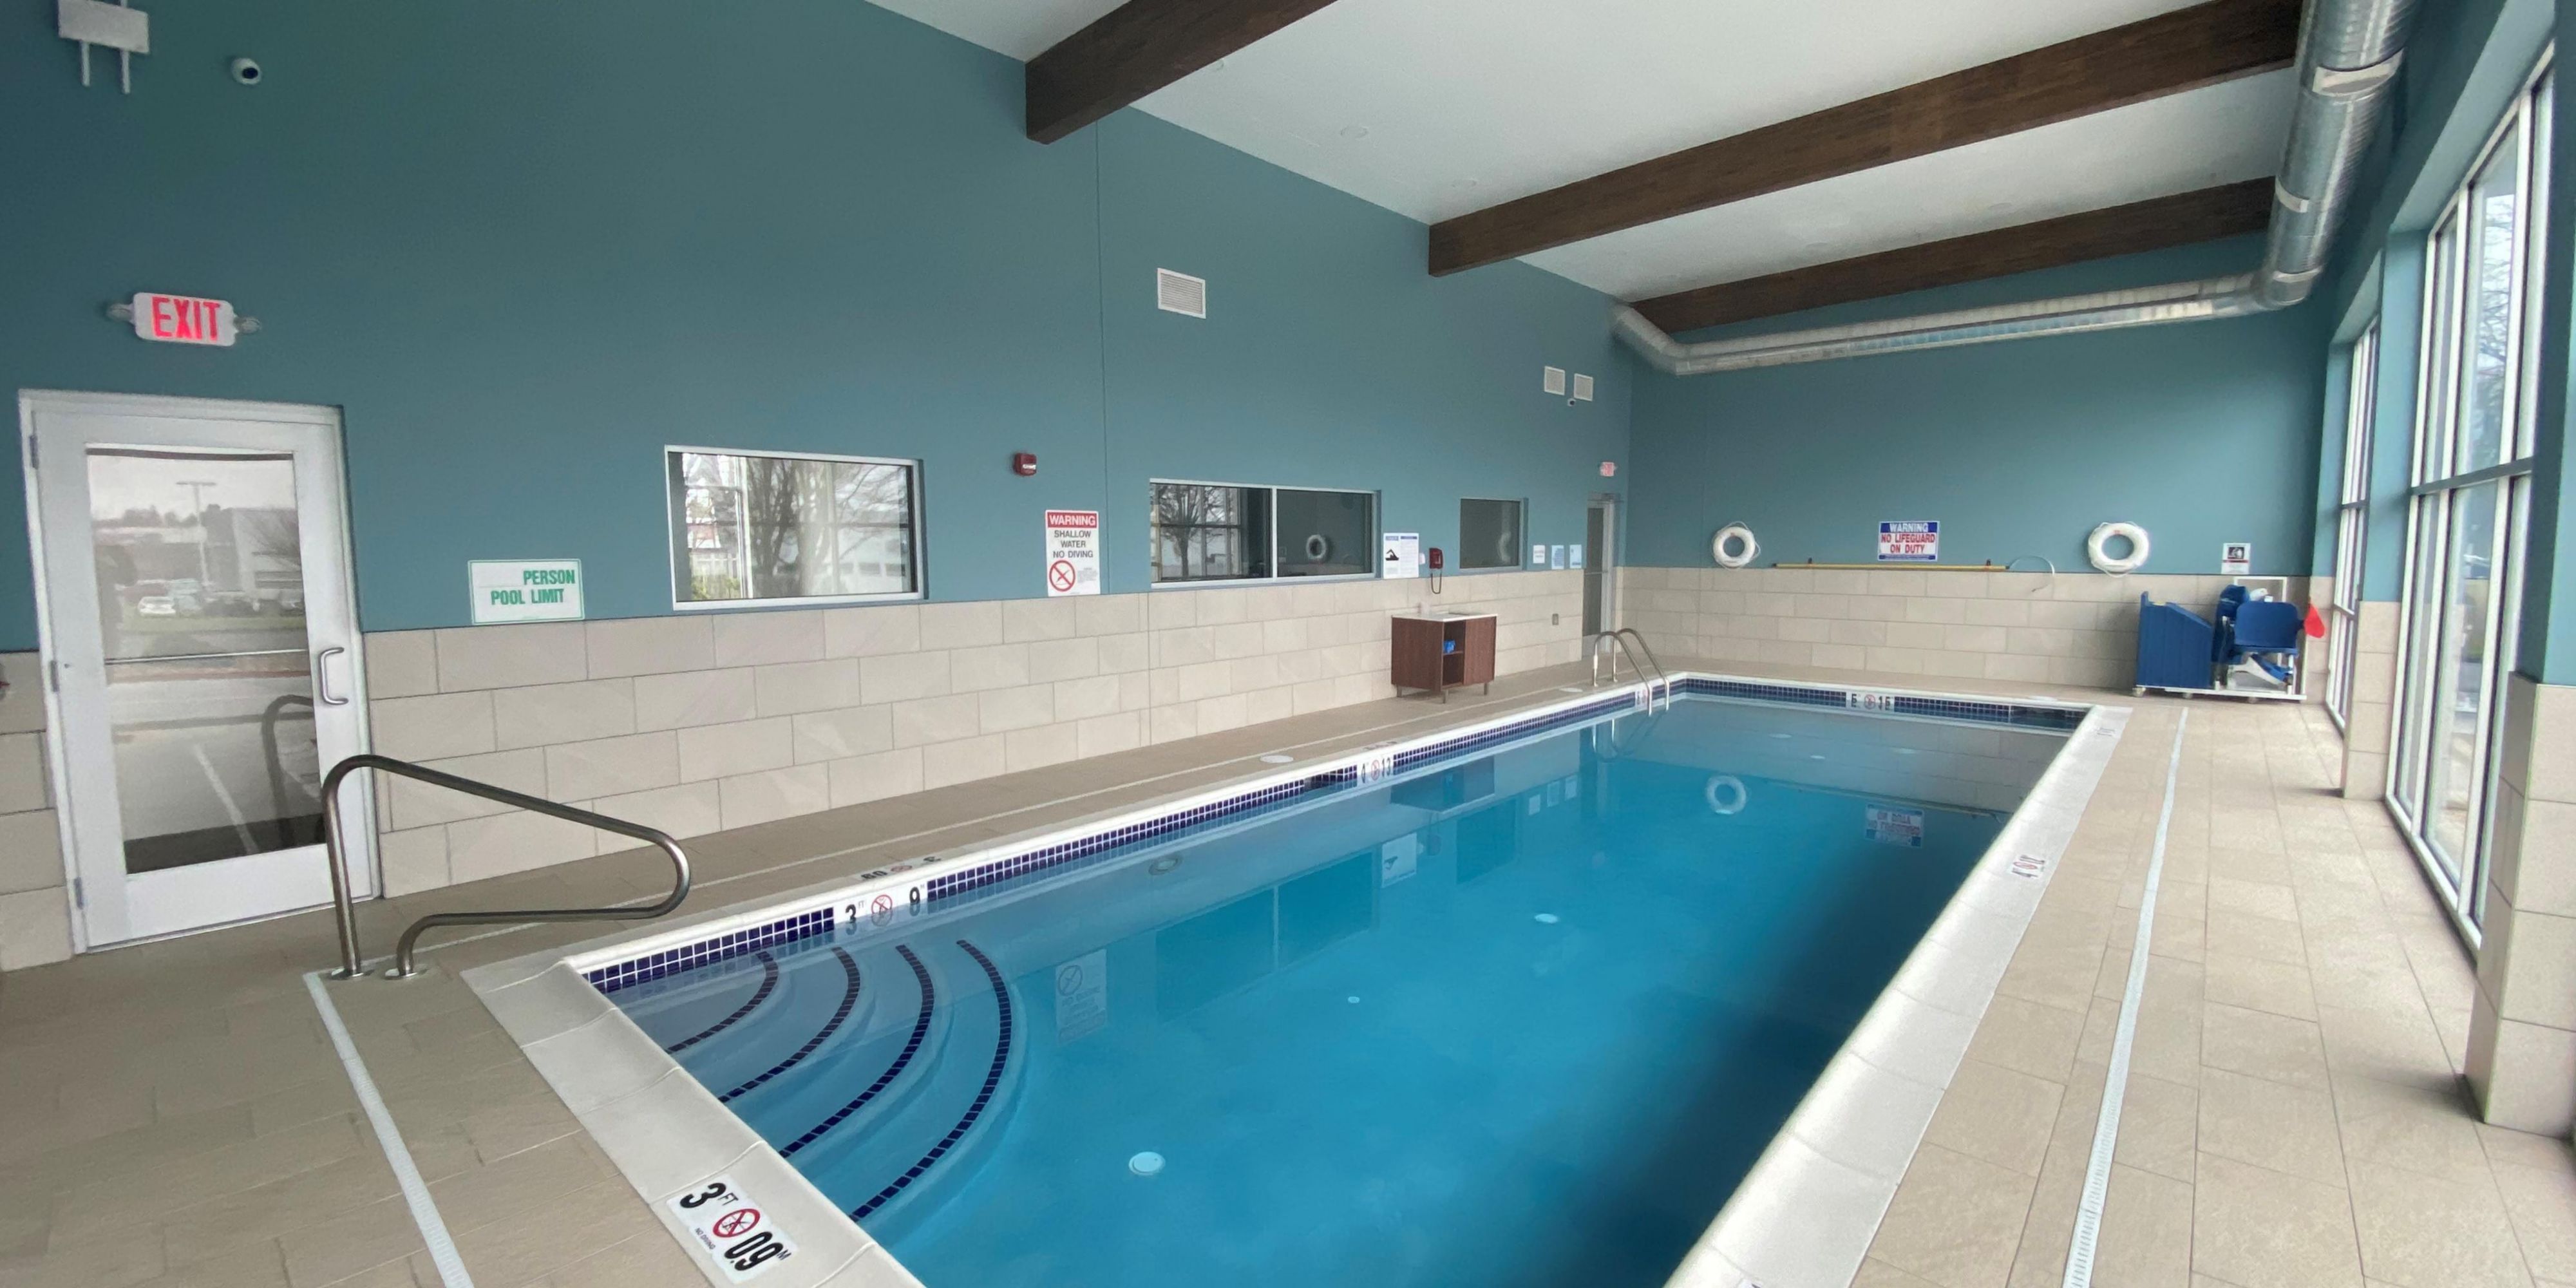 Take a dip in our relaxing, heated pool. The plentiful natural light, exposed beams, and calming colors will help you unwind from your day. It is attached to the fitness center for your total wellness convenience.